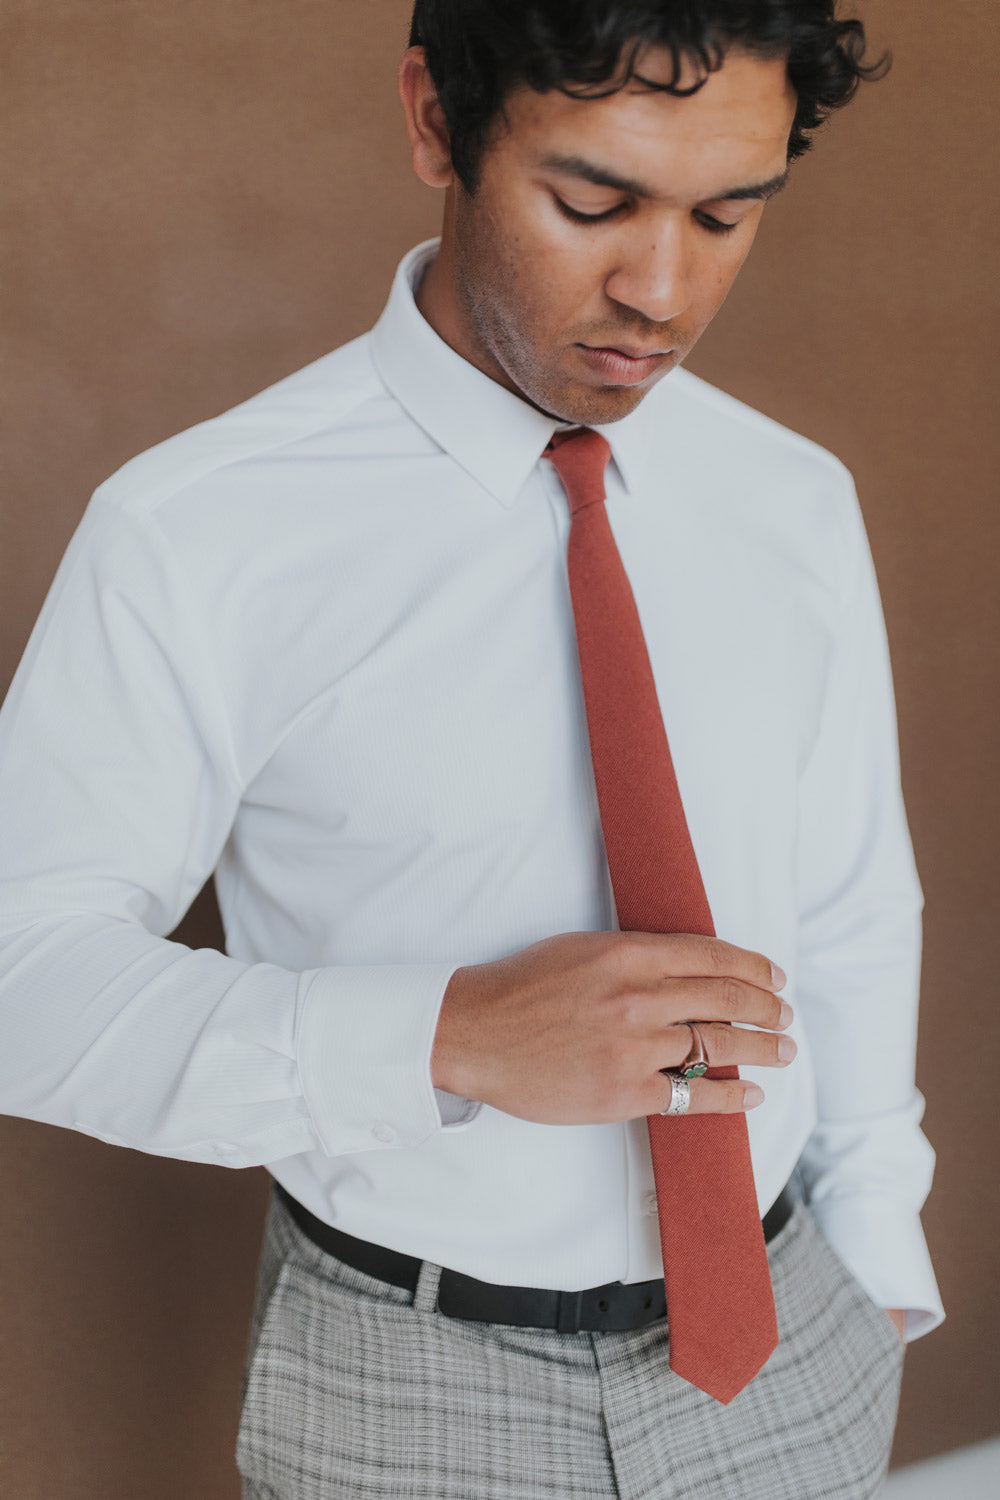 Rust Tie worn with a white shirt, black belt and gray plaid suit pants.